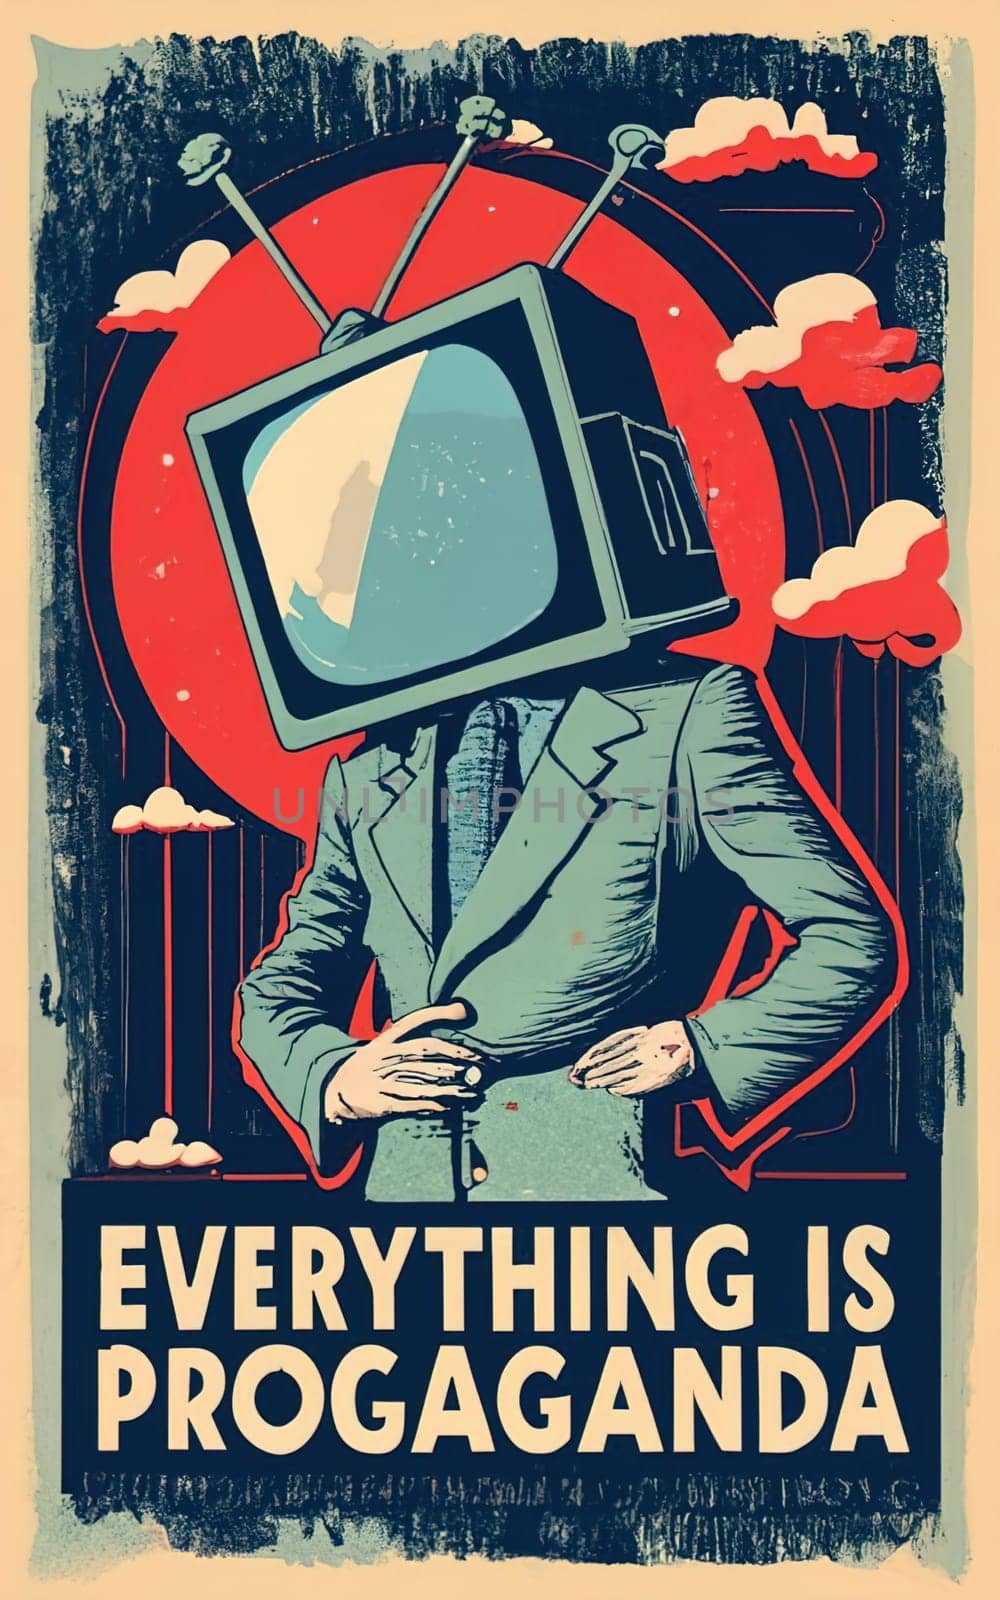 Vintage Propaganda Poster with 'EVERYTHING IS PROPAGANDA' - Retro TV, Steampunk, Cyberpunk Vibes download image